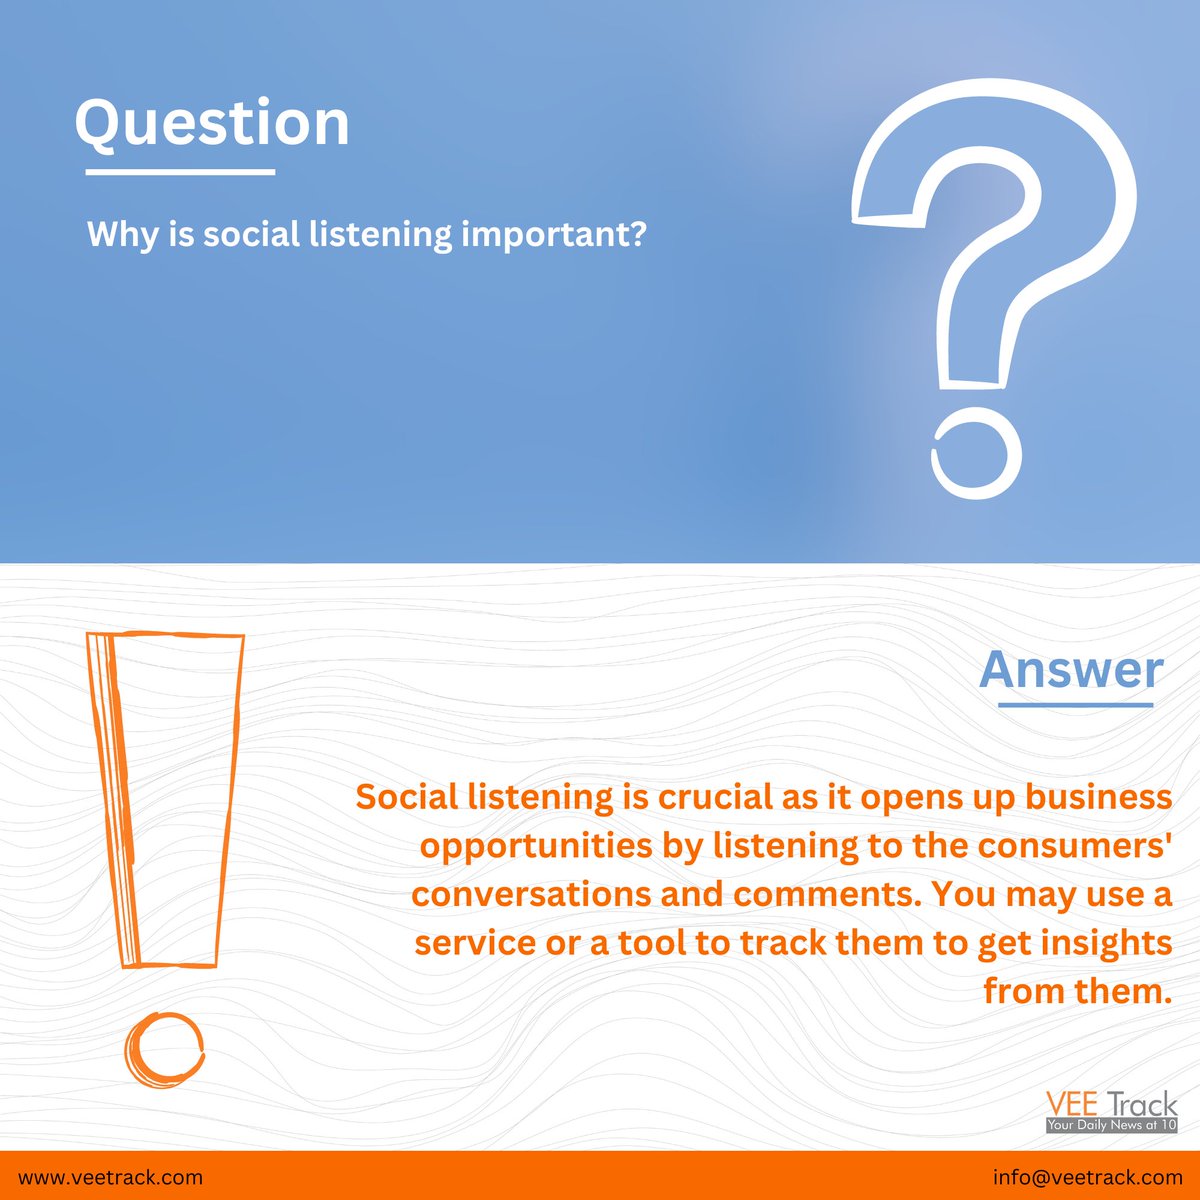 #Sociallistening gives you an advantage in tracking the needs of the market through derivation from consumers' opinions. Vee Track helps #businesses to track and analyze insights from them. 

Know More: bit.ly/3XoegEb
#SocialMonitoring #SocialMediaMonitoring